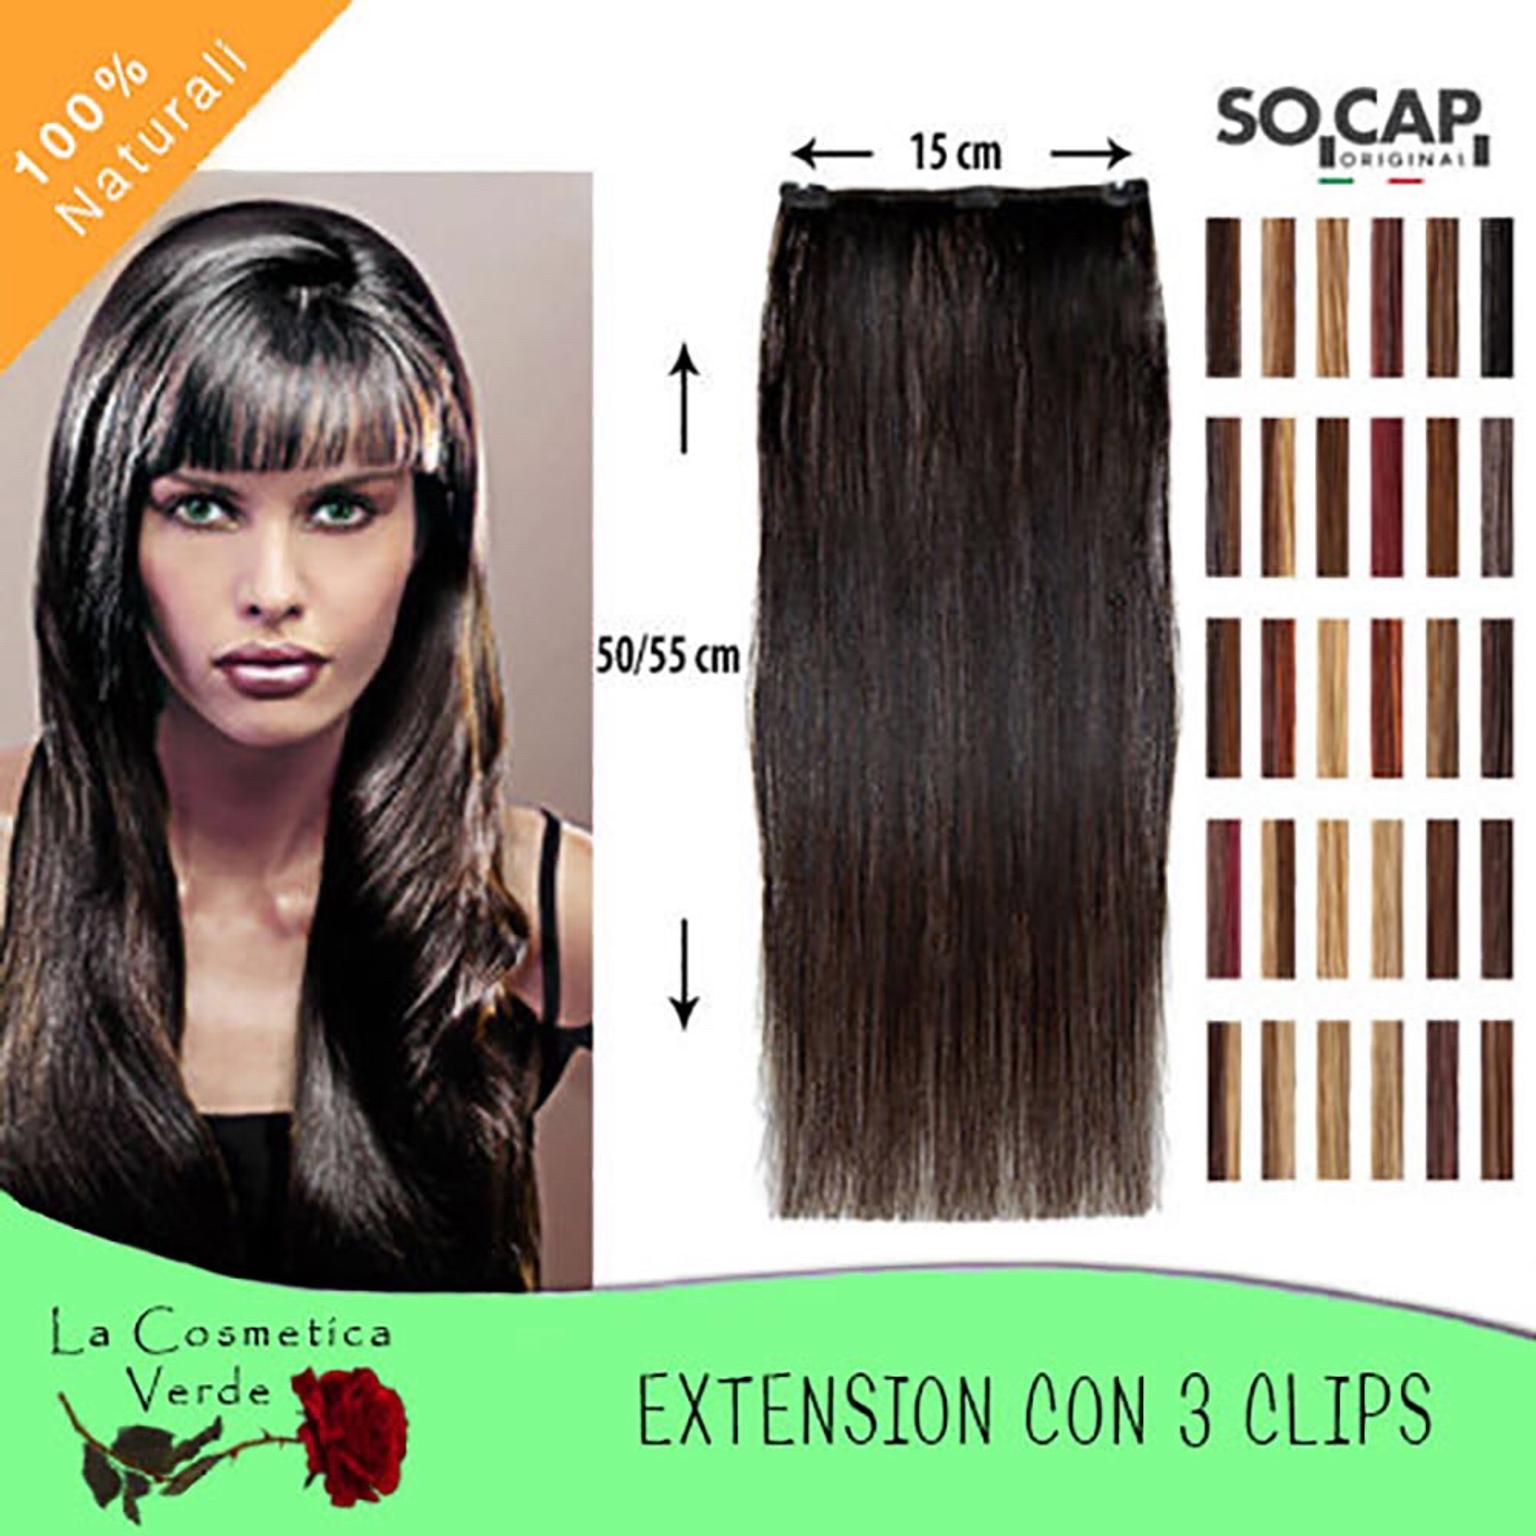 Extension clip capelli naturali 100% 50/55cm in 80029 Sant'Antimo for  €20.00 for sale | Shpock